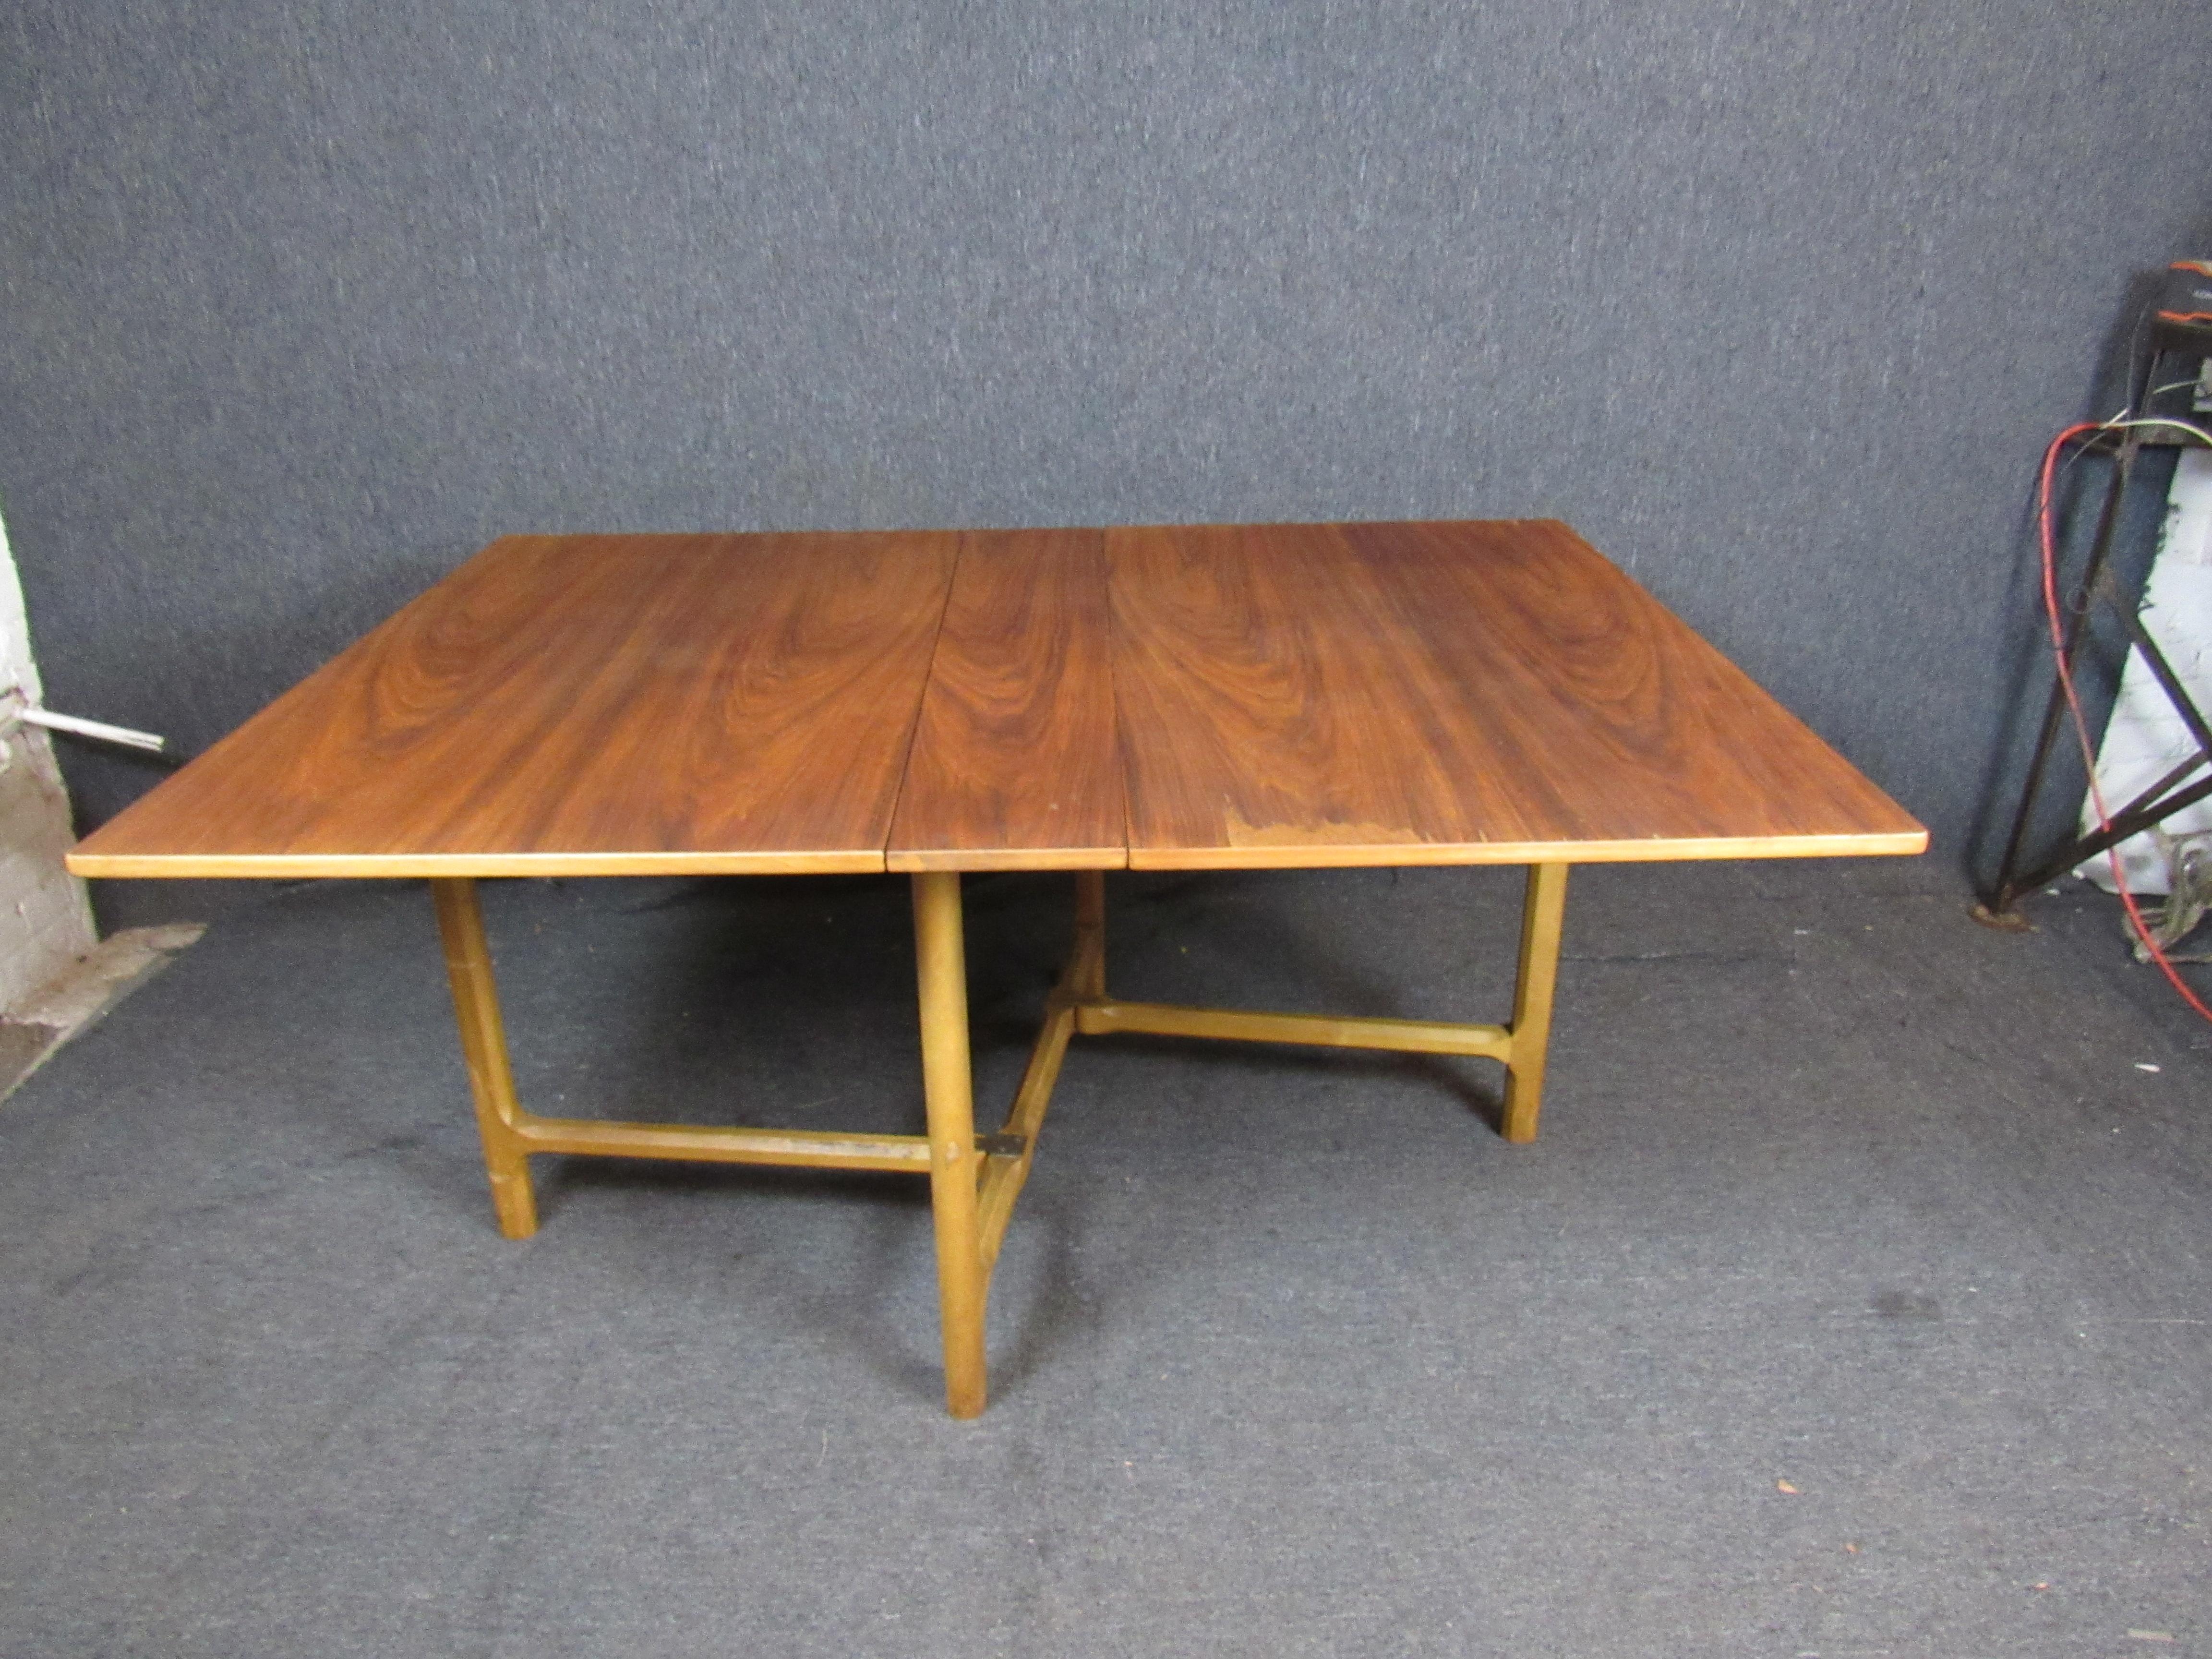 Wonderful vintage maple drop-leaf table featuring unique carved gate legs. Use with one leaf or two to adjust the table top from a compact 44